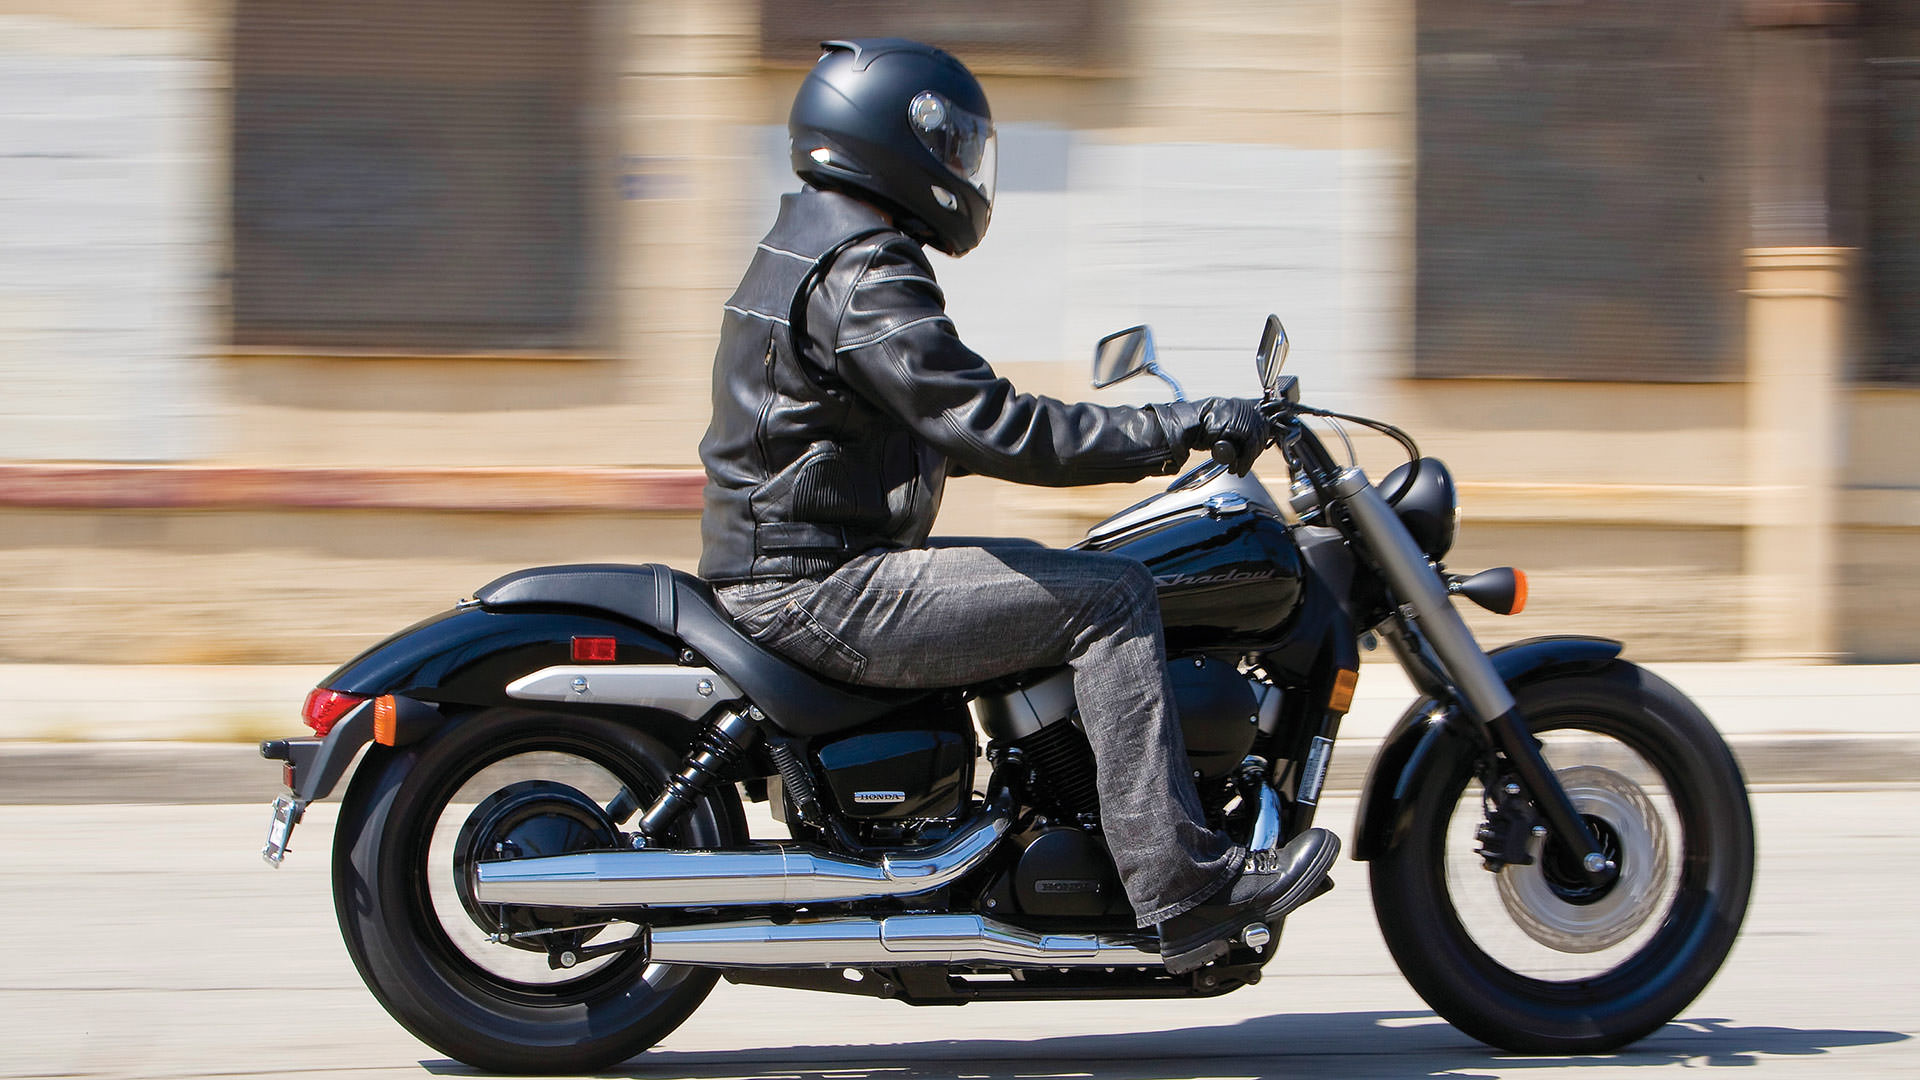 22 Honda Shadow Phantom 750 Review Specs Features Changes Explained Vt750 Bobber Motorcycle